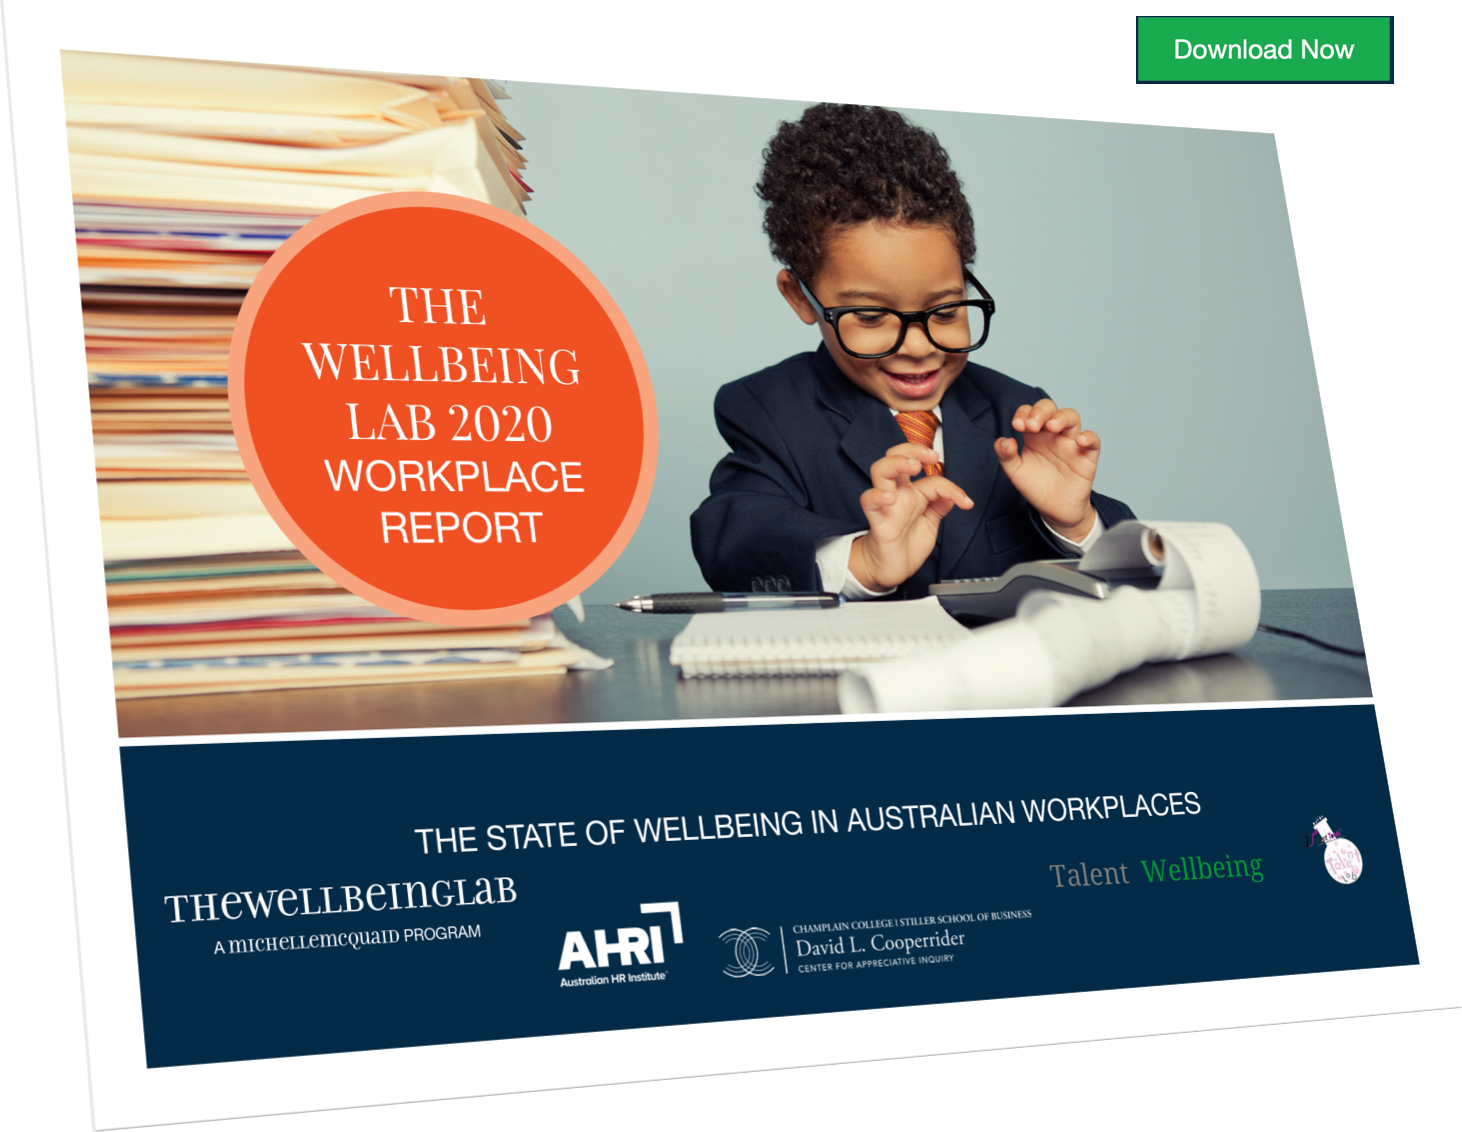 Download the State of Wellbeing in Australian Workplaces Report (Aug 2020)